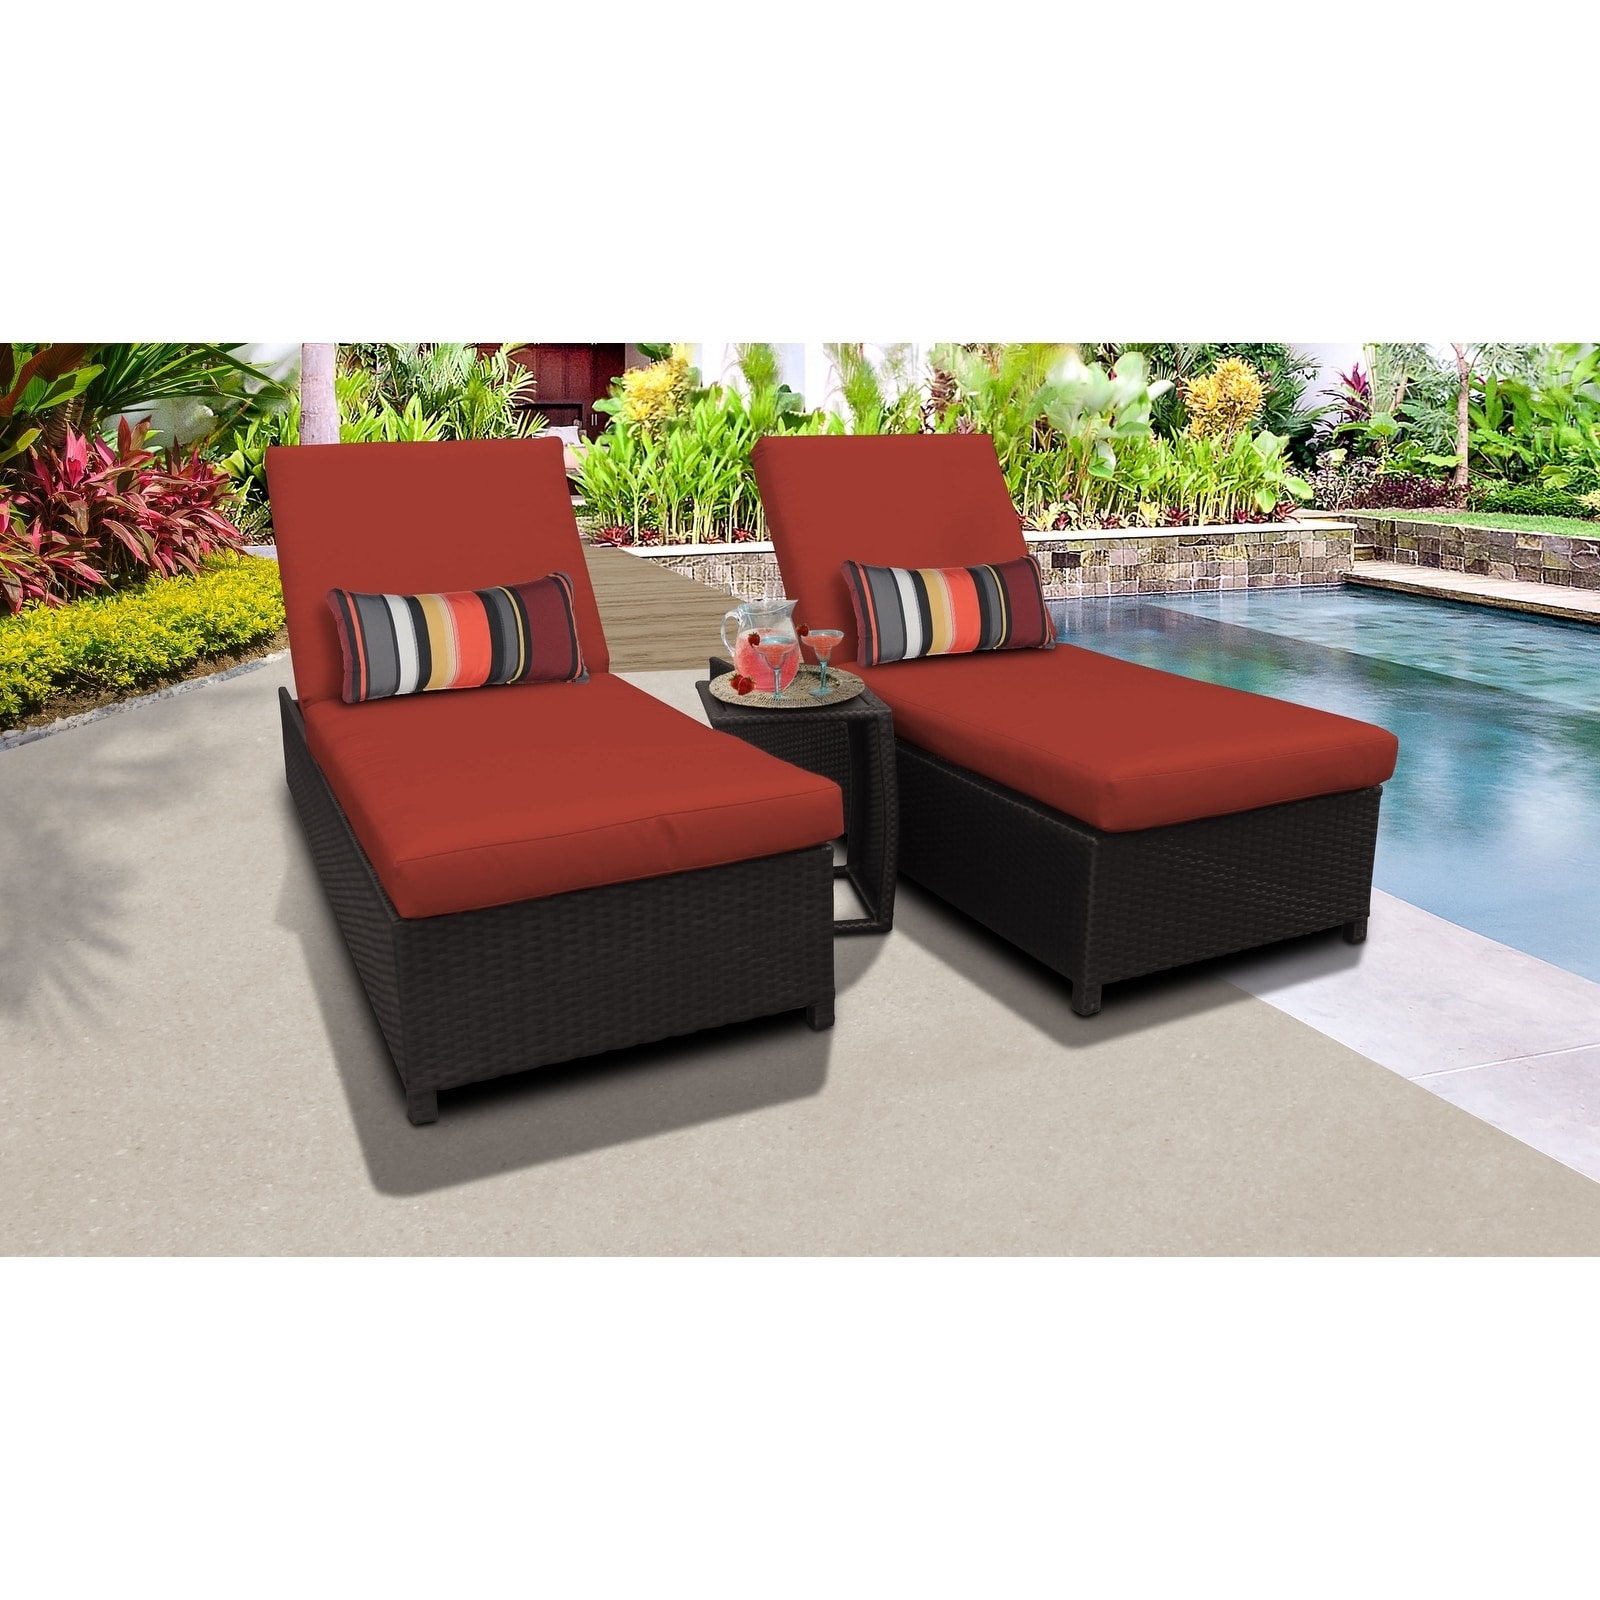 Barbados Wheeled Chaise Set Of 2 Outdoor Wicker Patio Furniture And Side Table